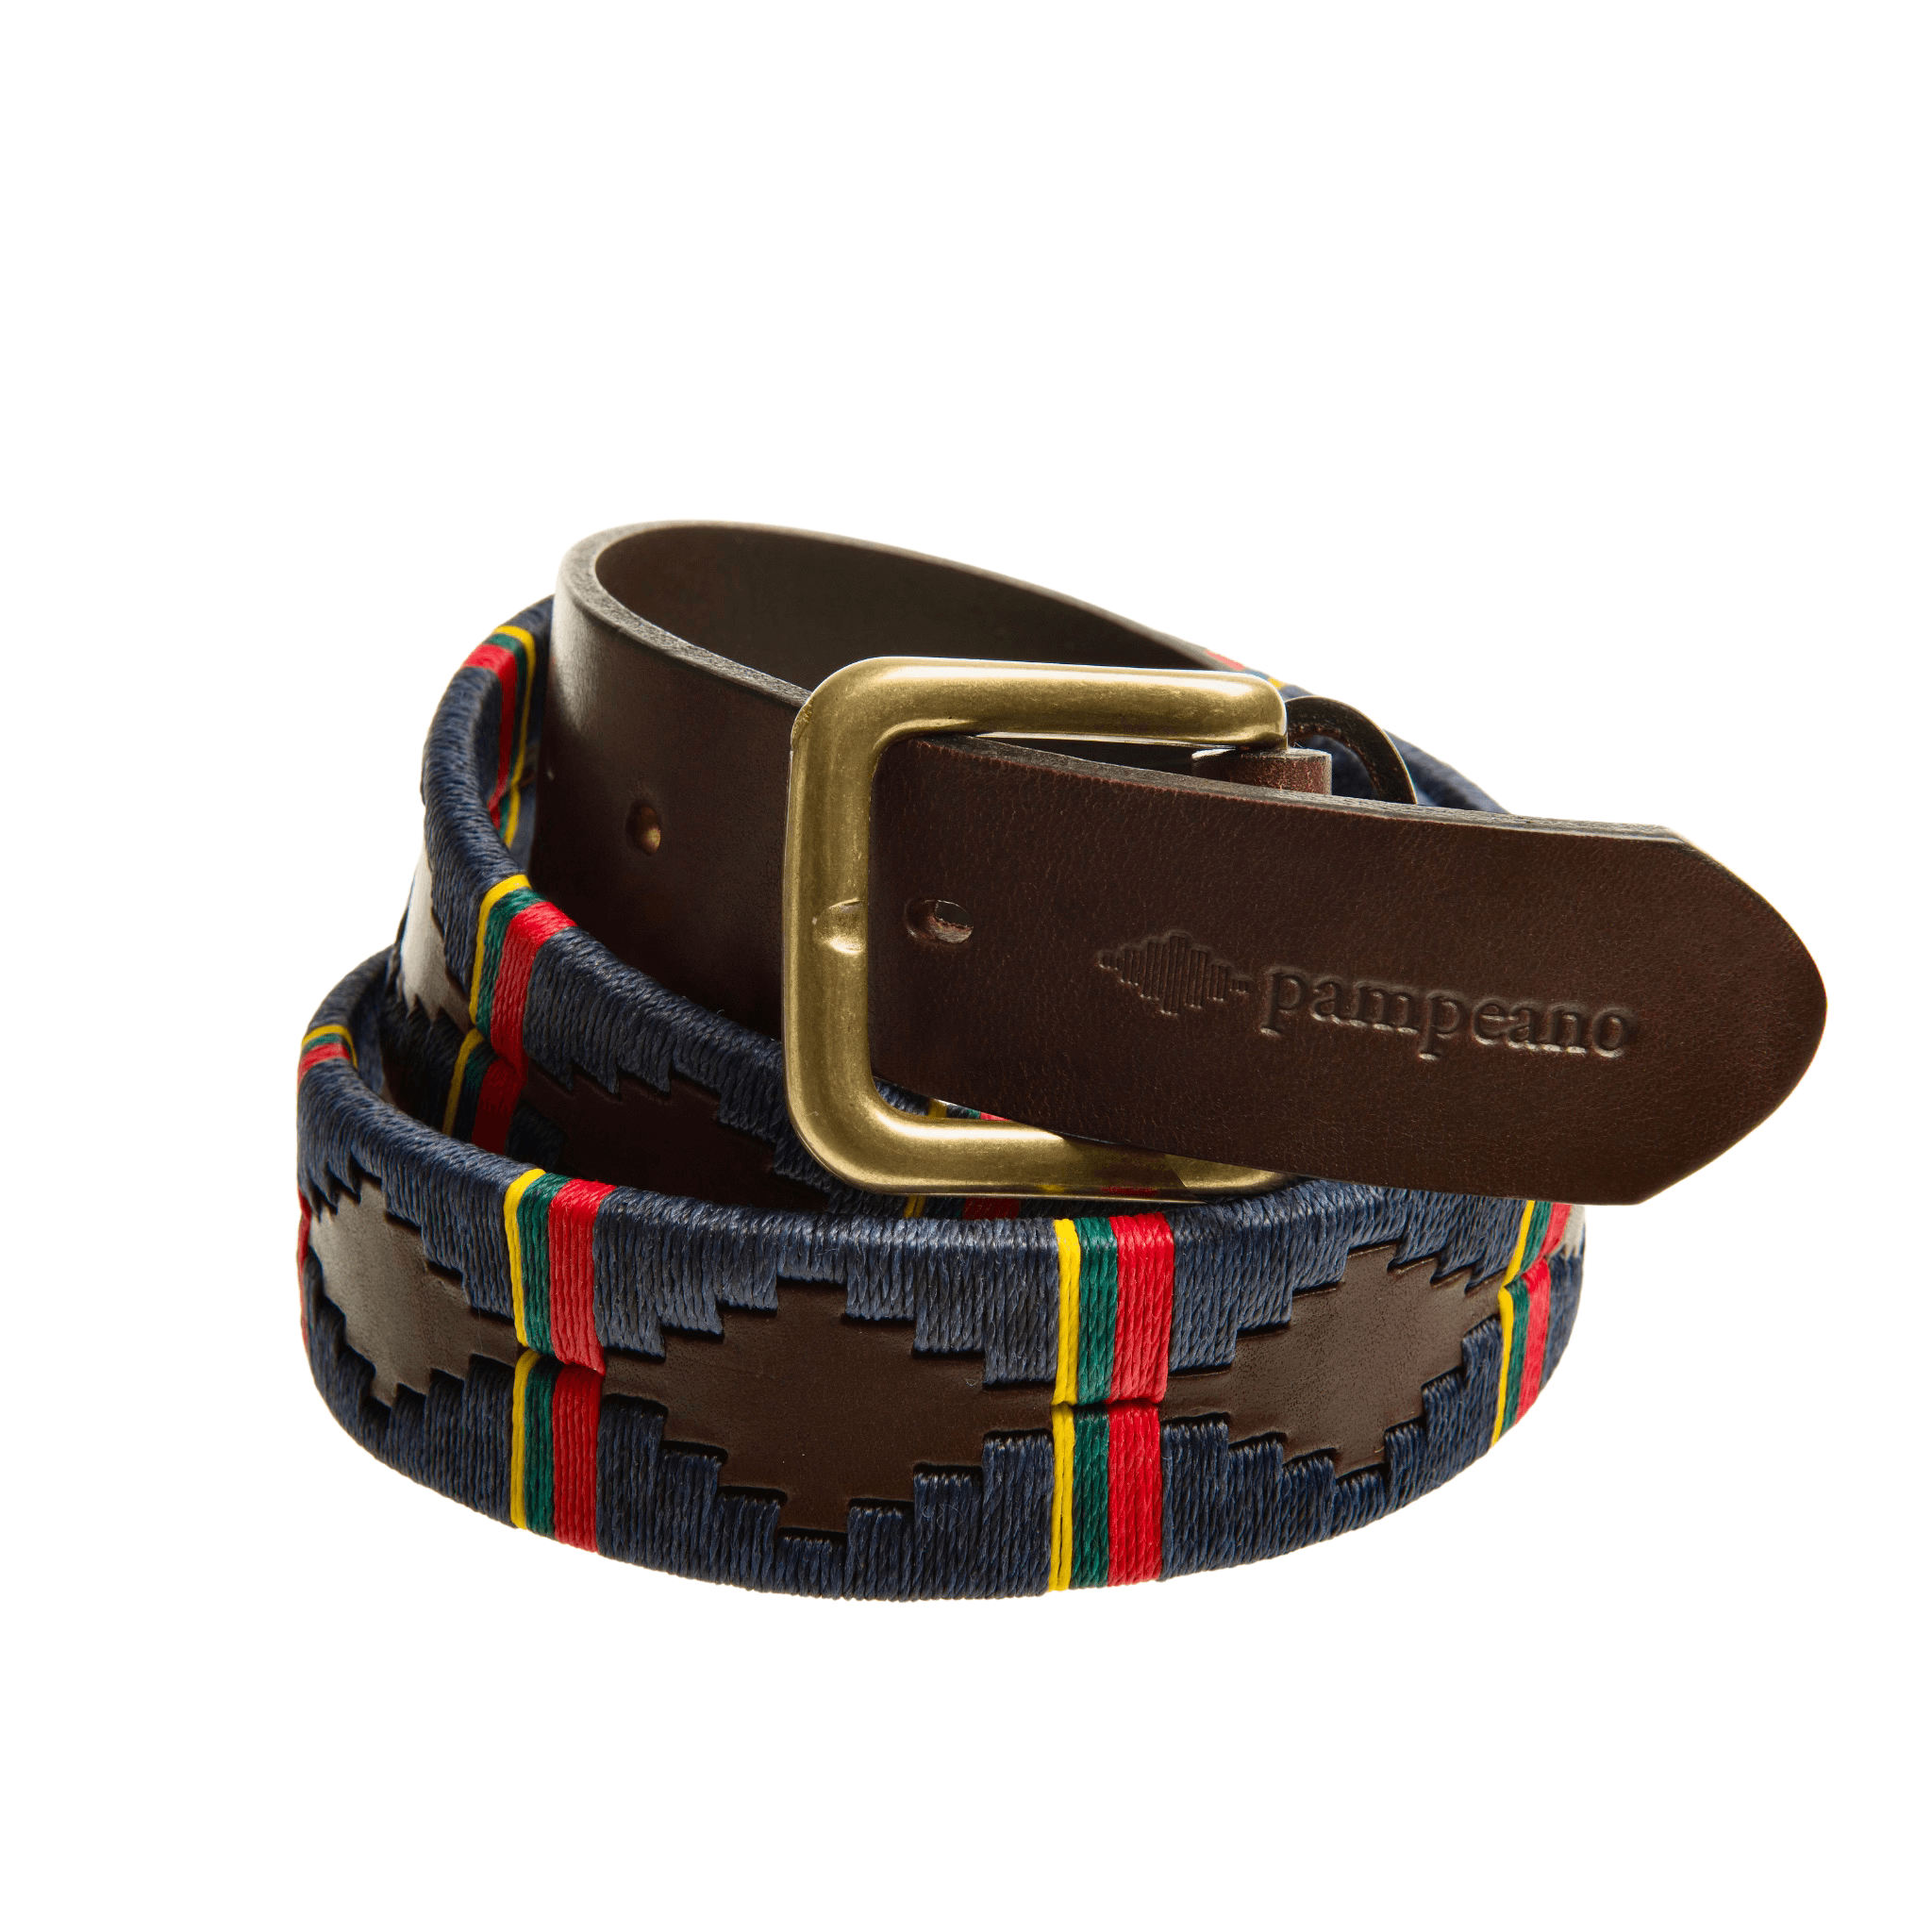 The exclusive Country Direct & Pampeano Royal Marine Commando Leather Polo Belt, featuring navy-blue, yellow, red, and green wax thread detailing. 